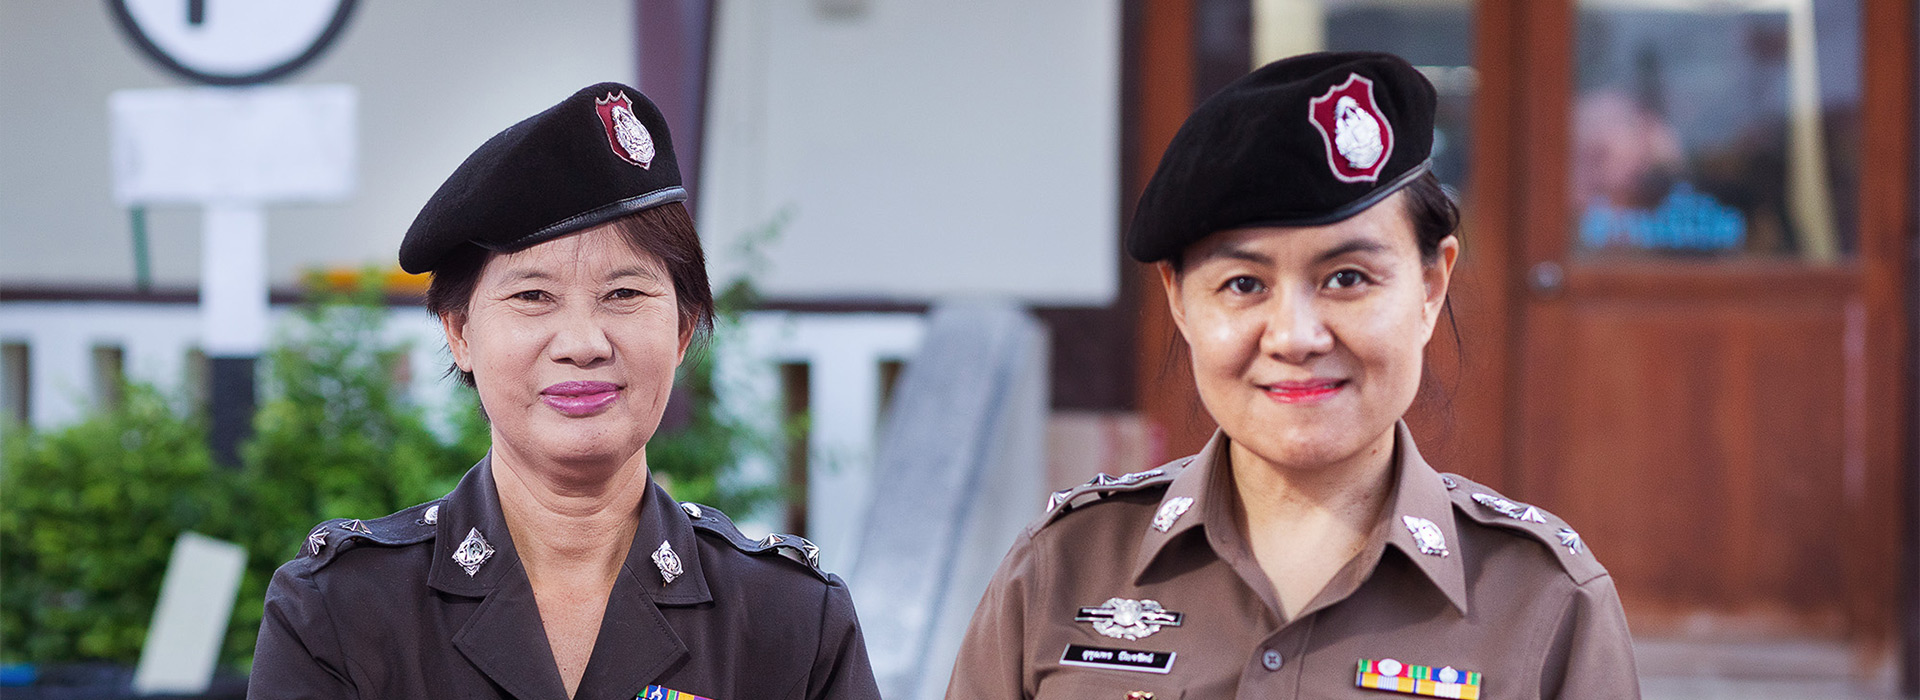 Two smiling policewomen with many badges.